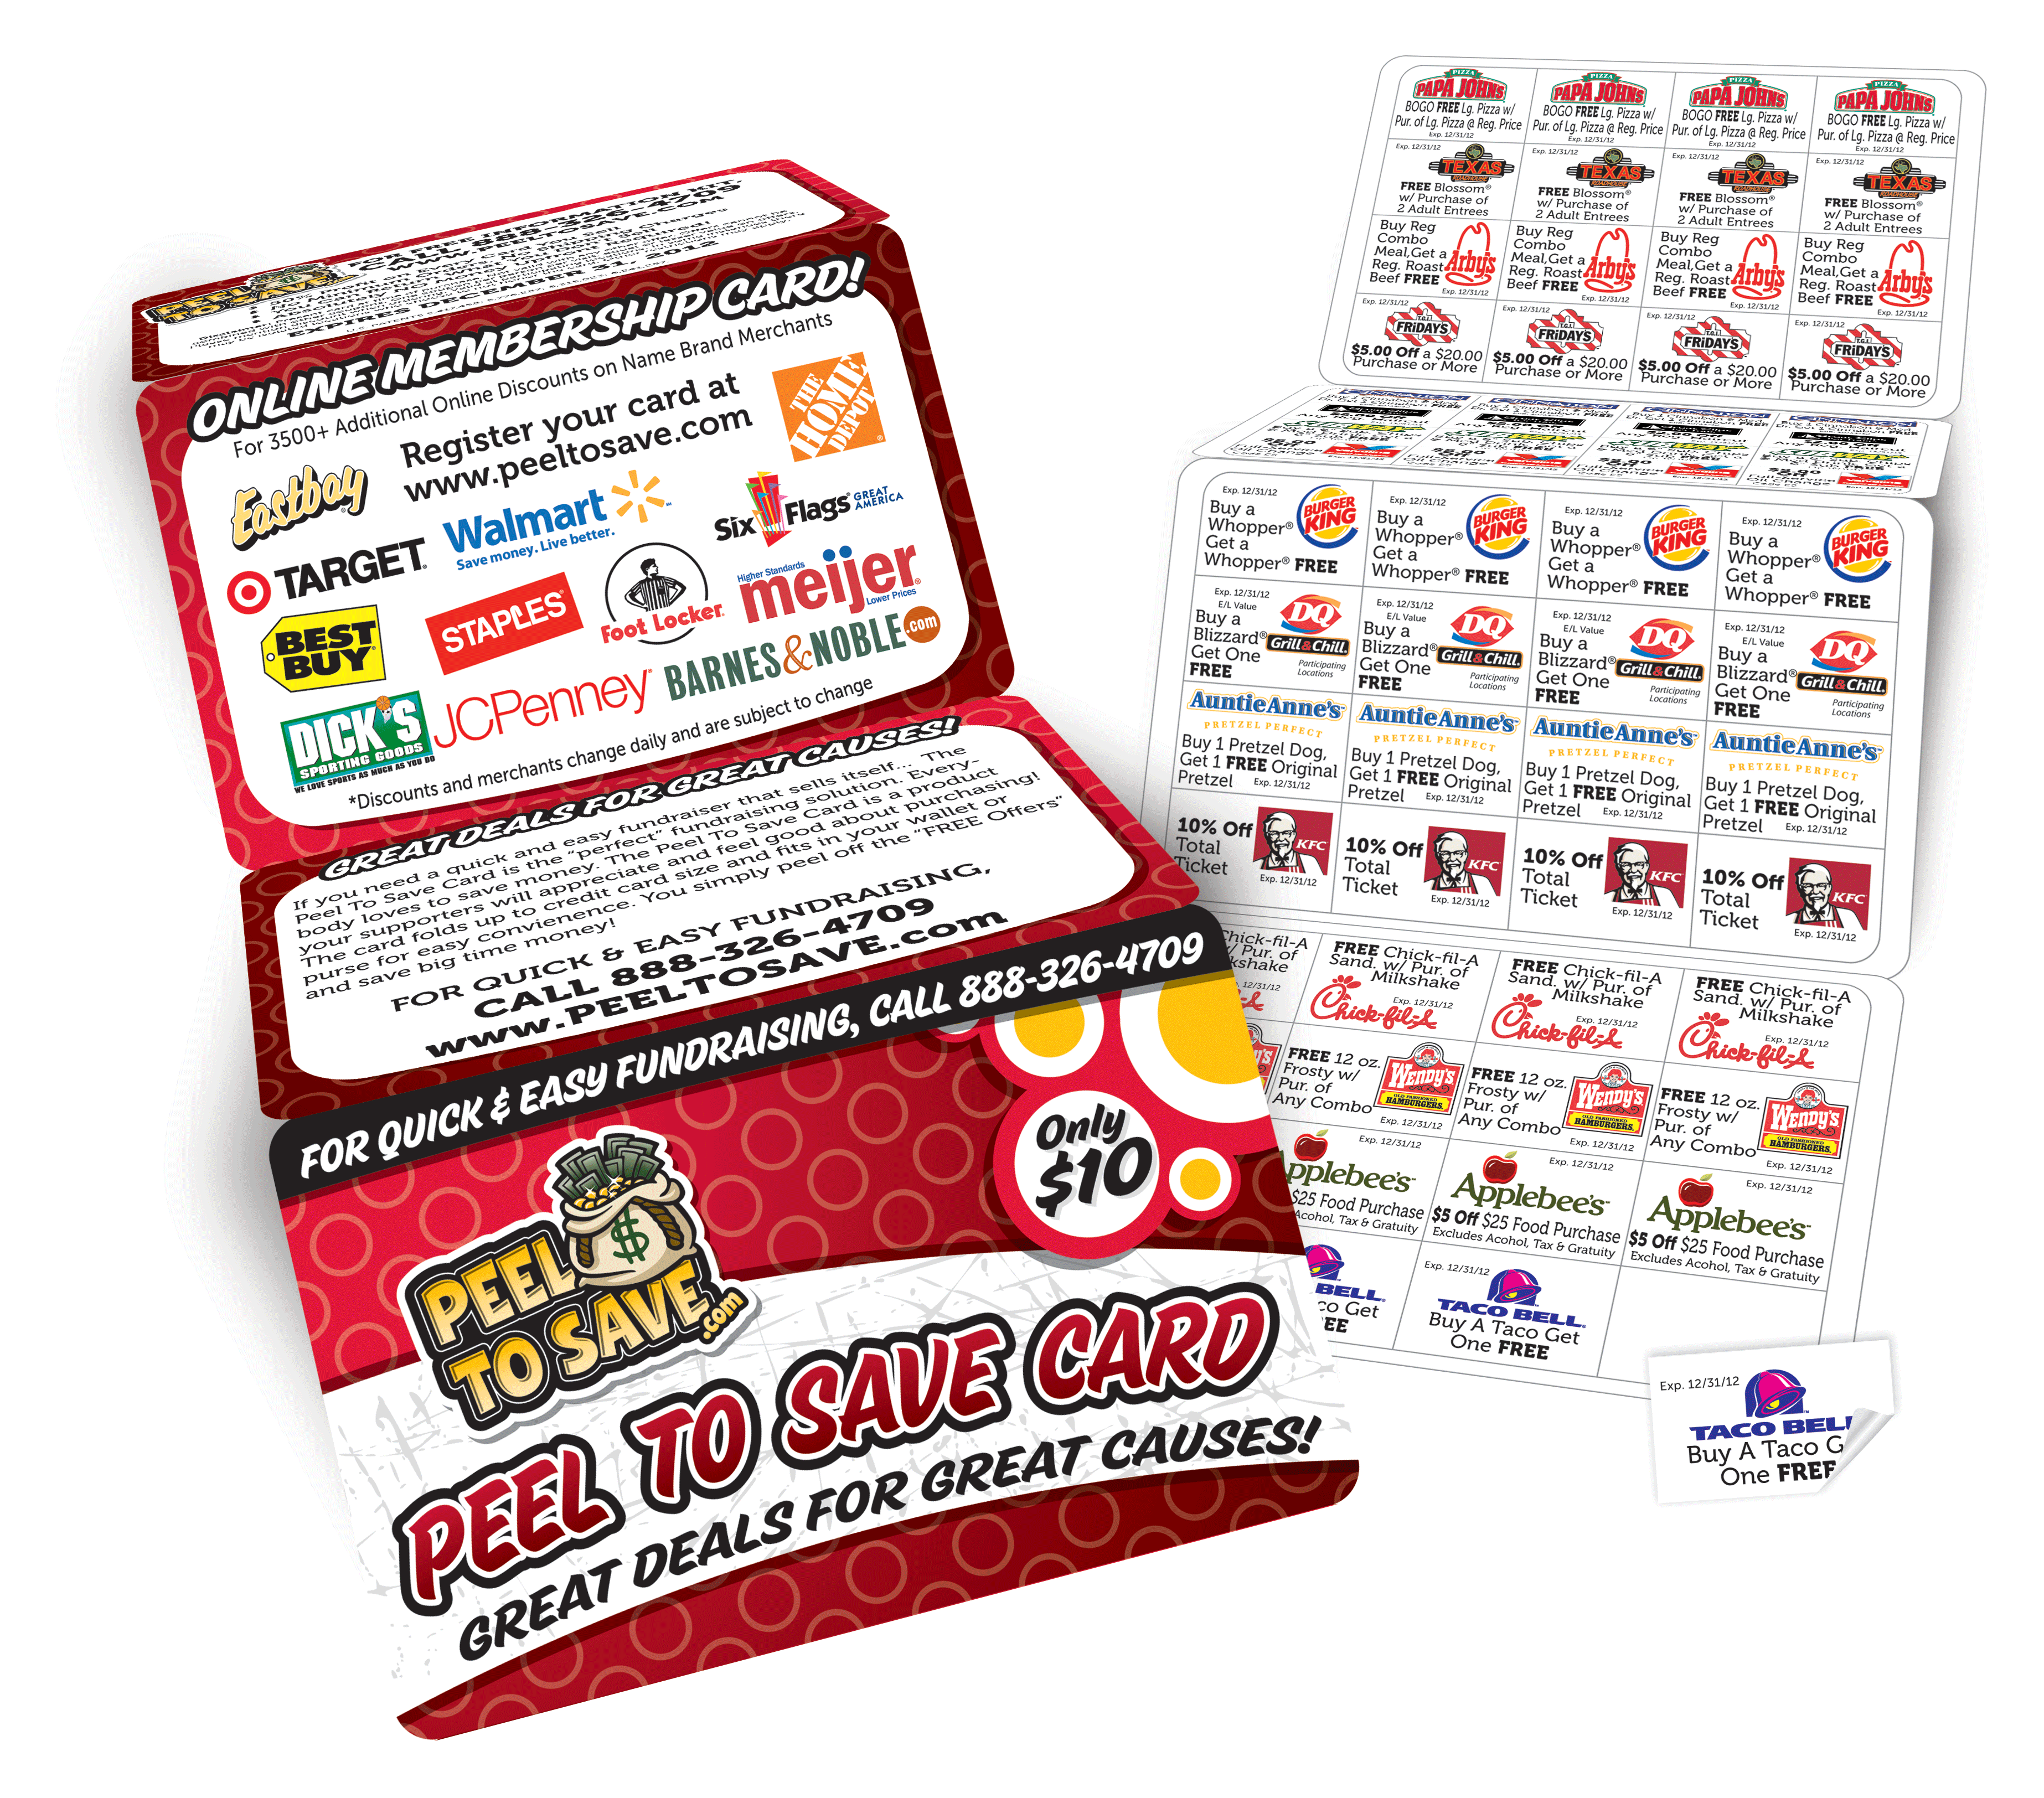 Peel To Save® Fundraising Cards – Peeler Fundraising Discount Cards